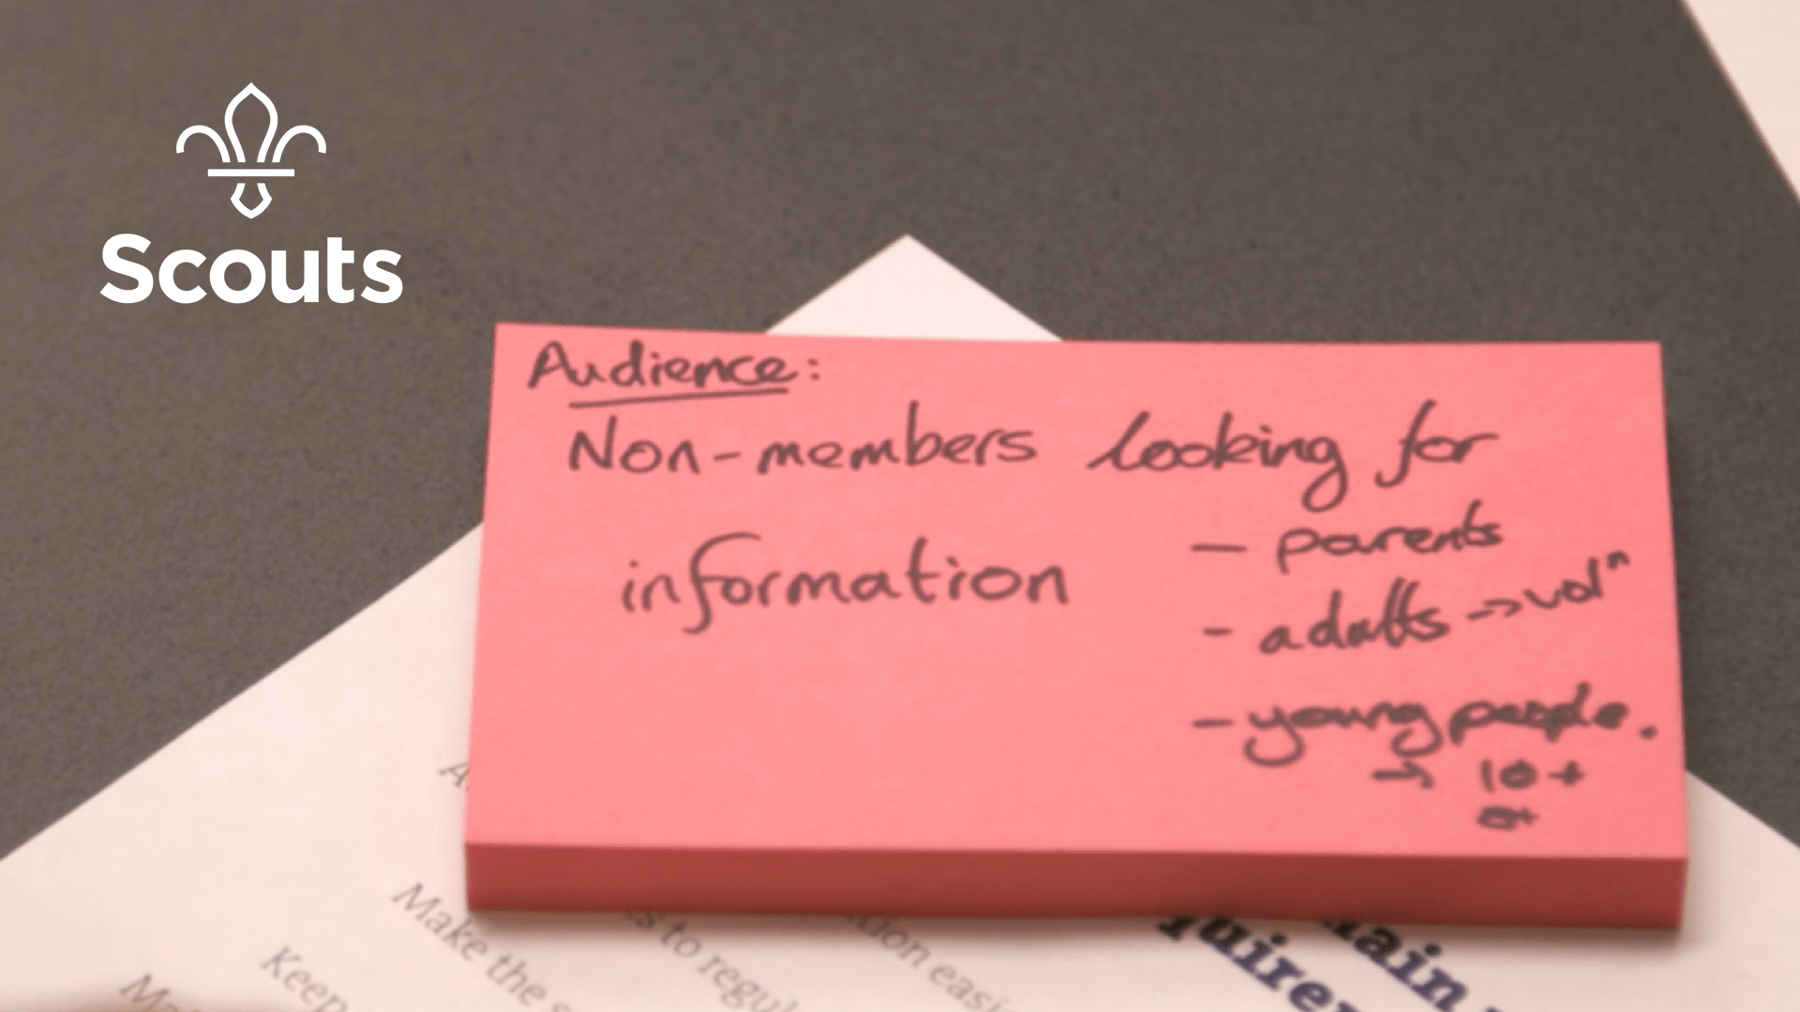 Image of a post it note with audience: non-members looking for information. Parents, adults, young people. Written on it.